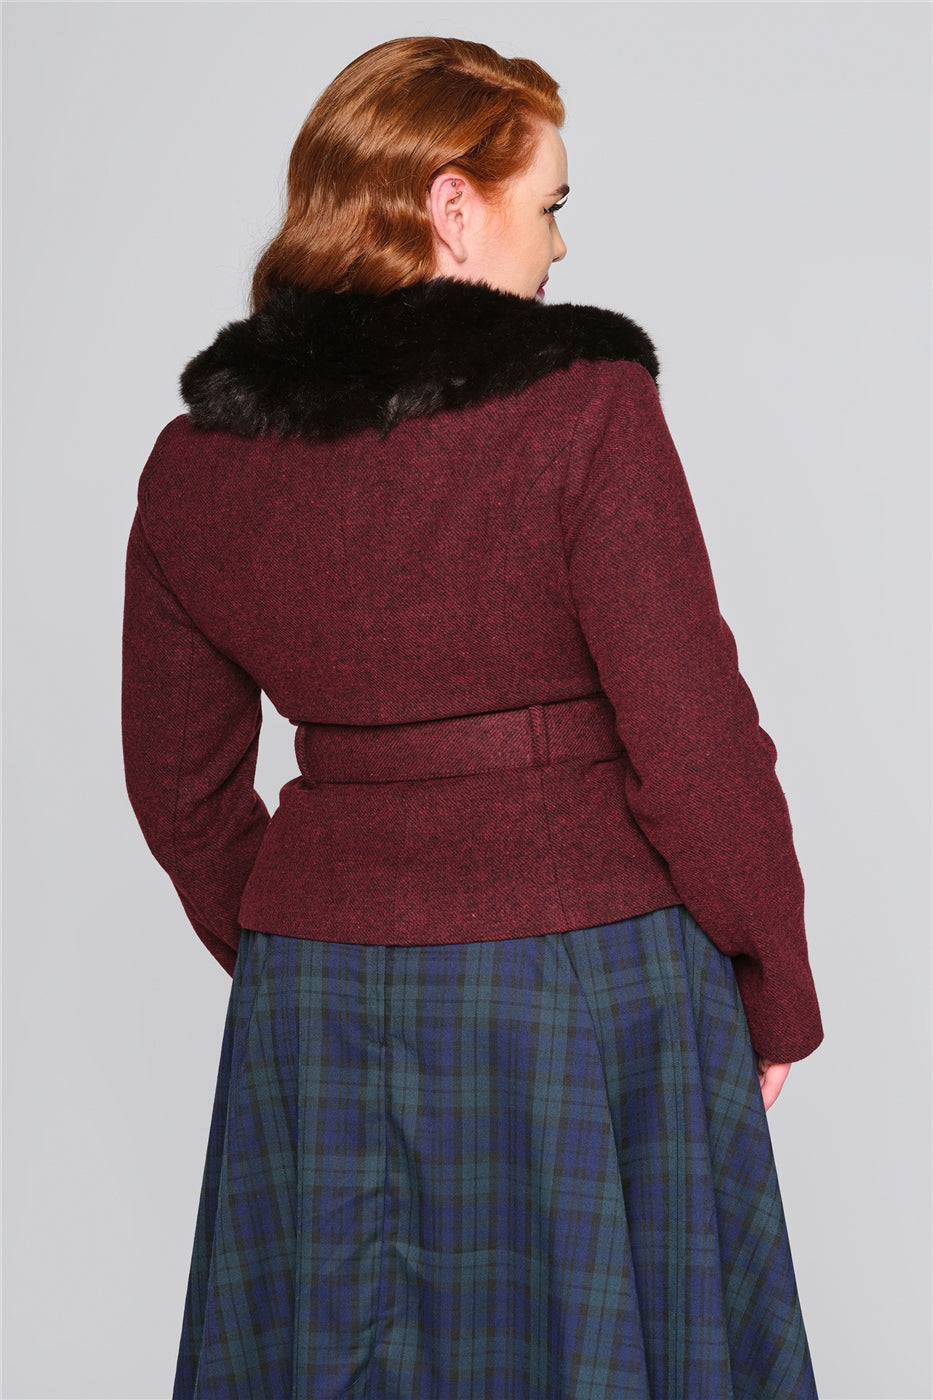 Plus size model facing away showing off the back of the Burgundy Molly Jacket by Collectif